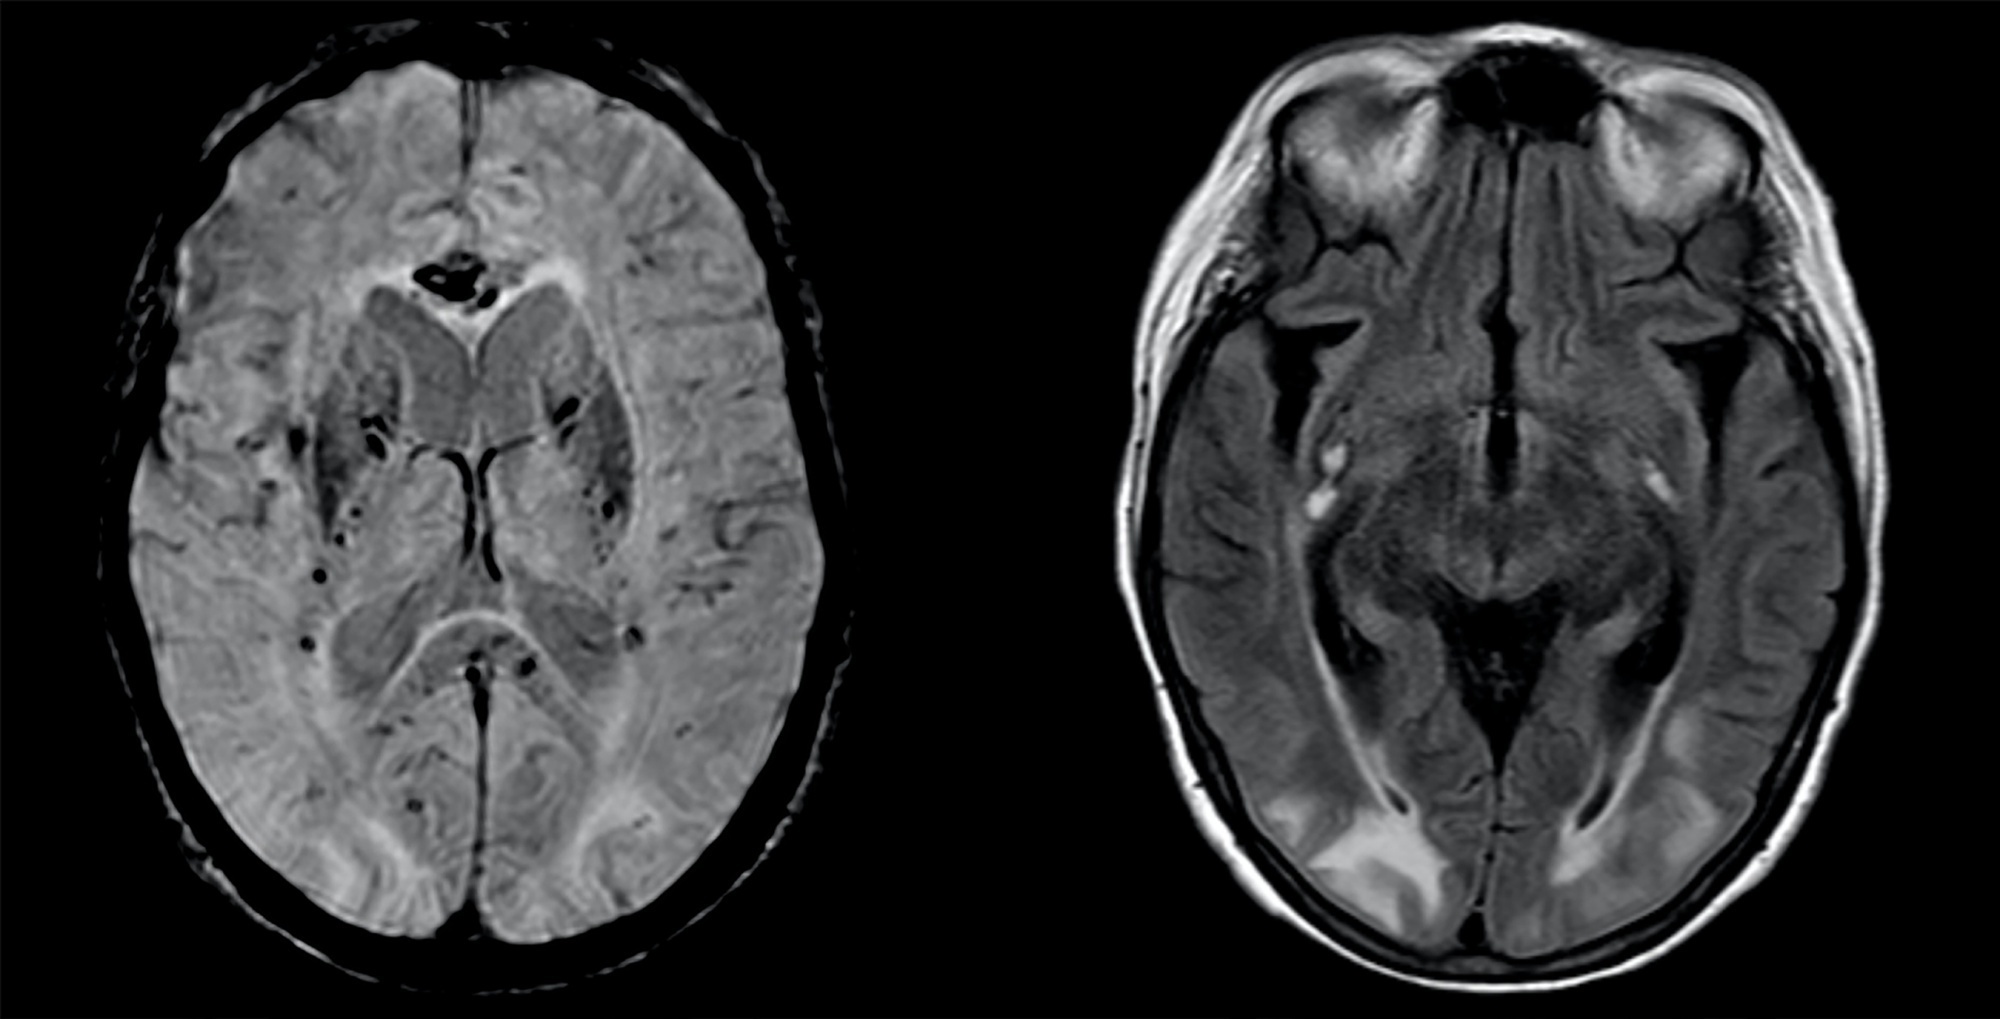 Posterior reversible encephalopathy syndrome in a patient submitted to extracorporeal membrane oxygenation for COVID-19